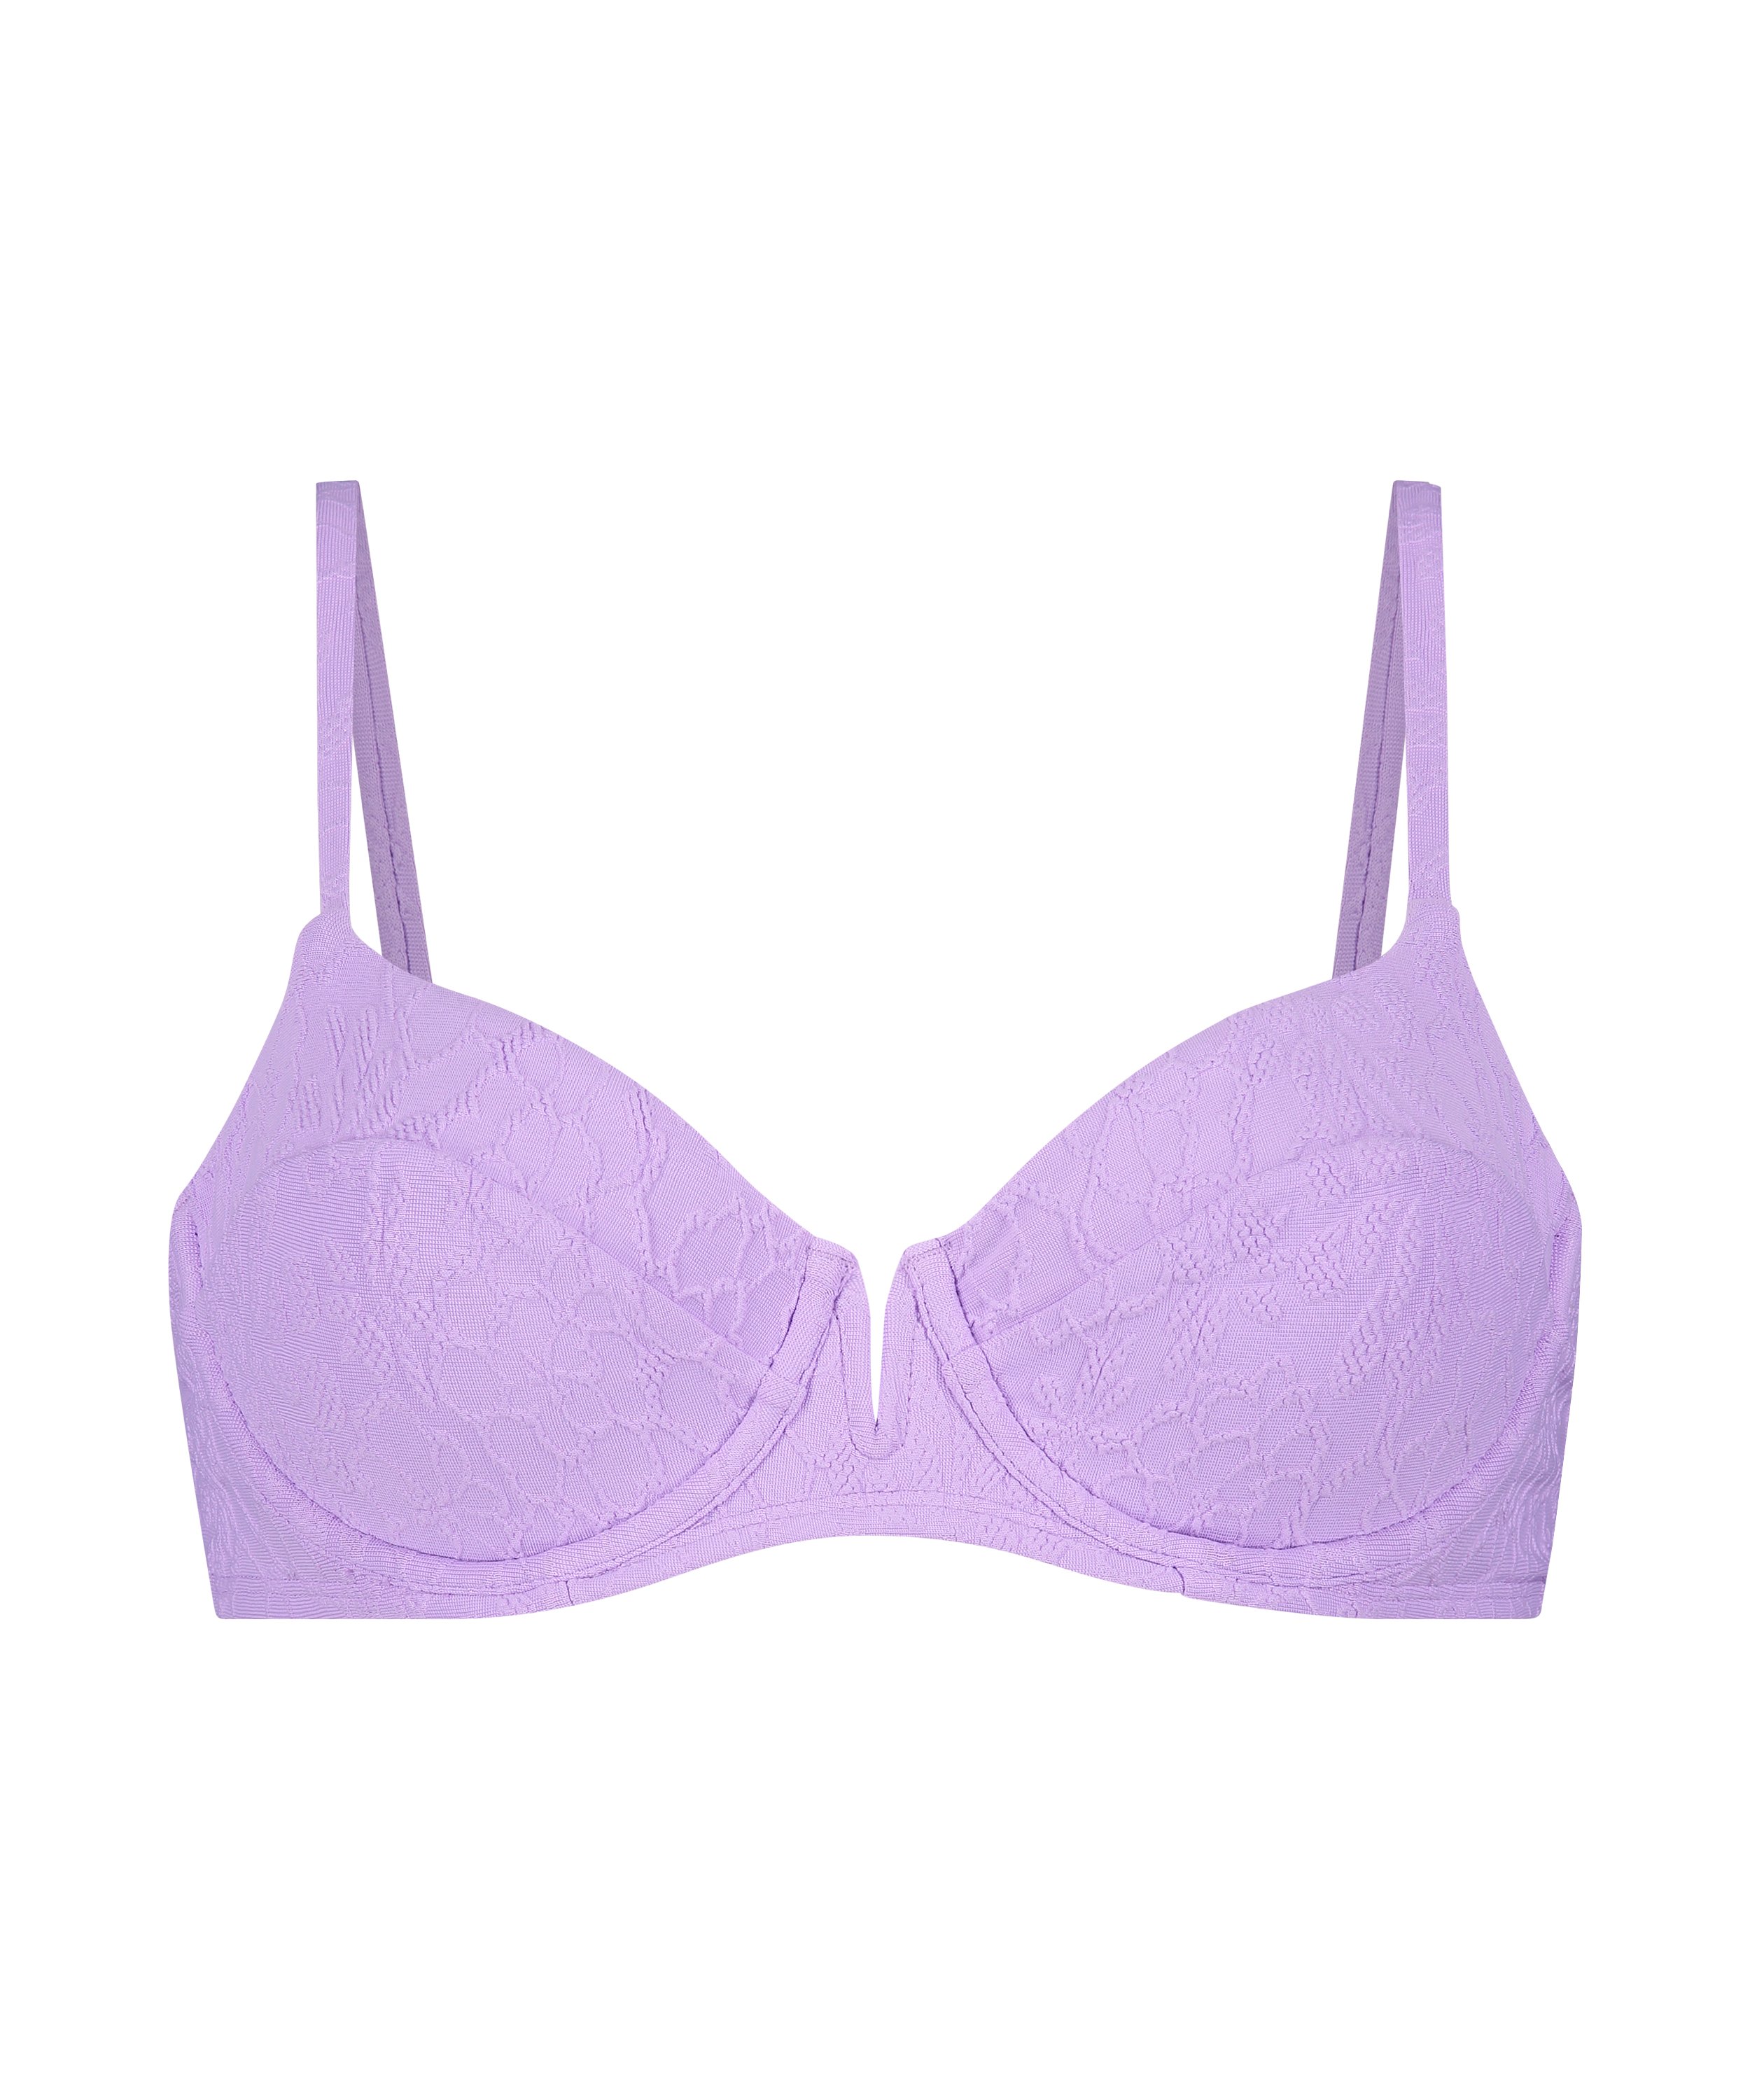 Libby non-padded underwired bikini top for £29 - Fabulous Full Cup ...